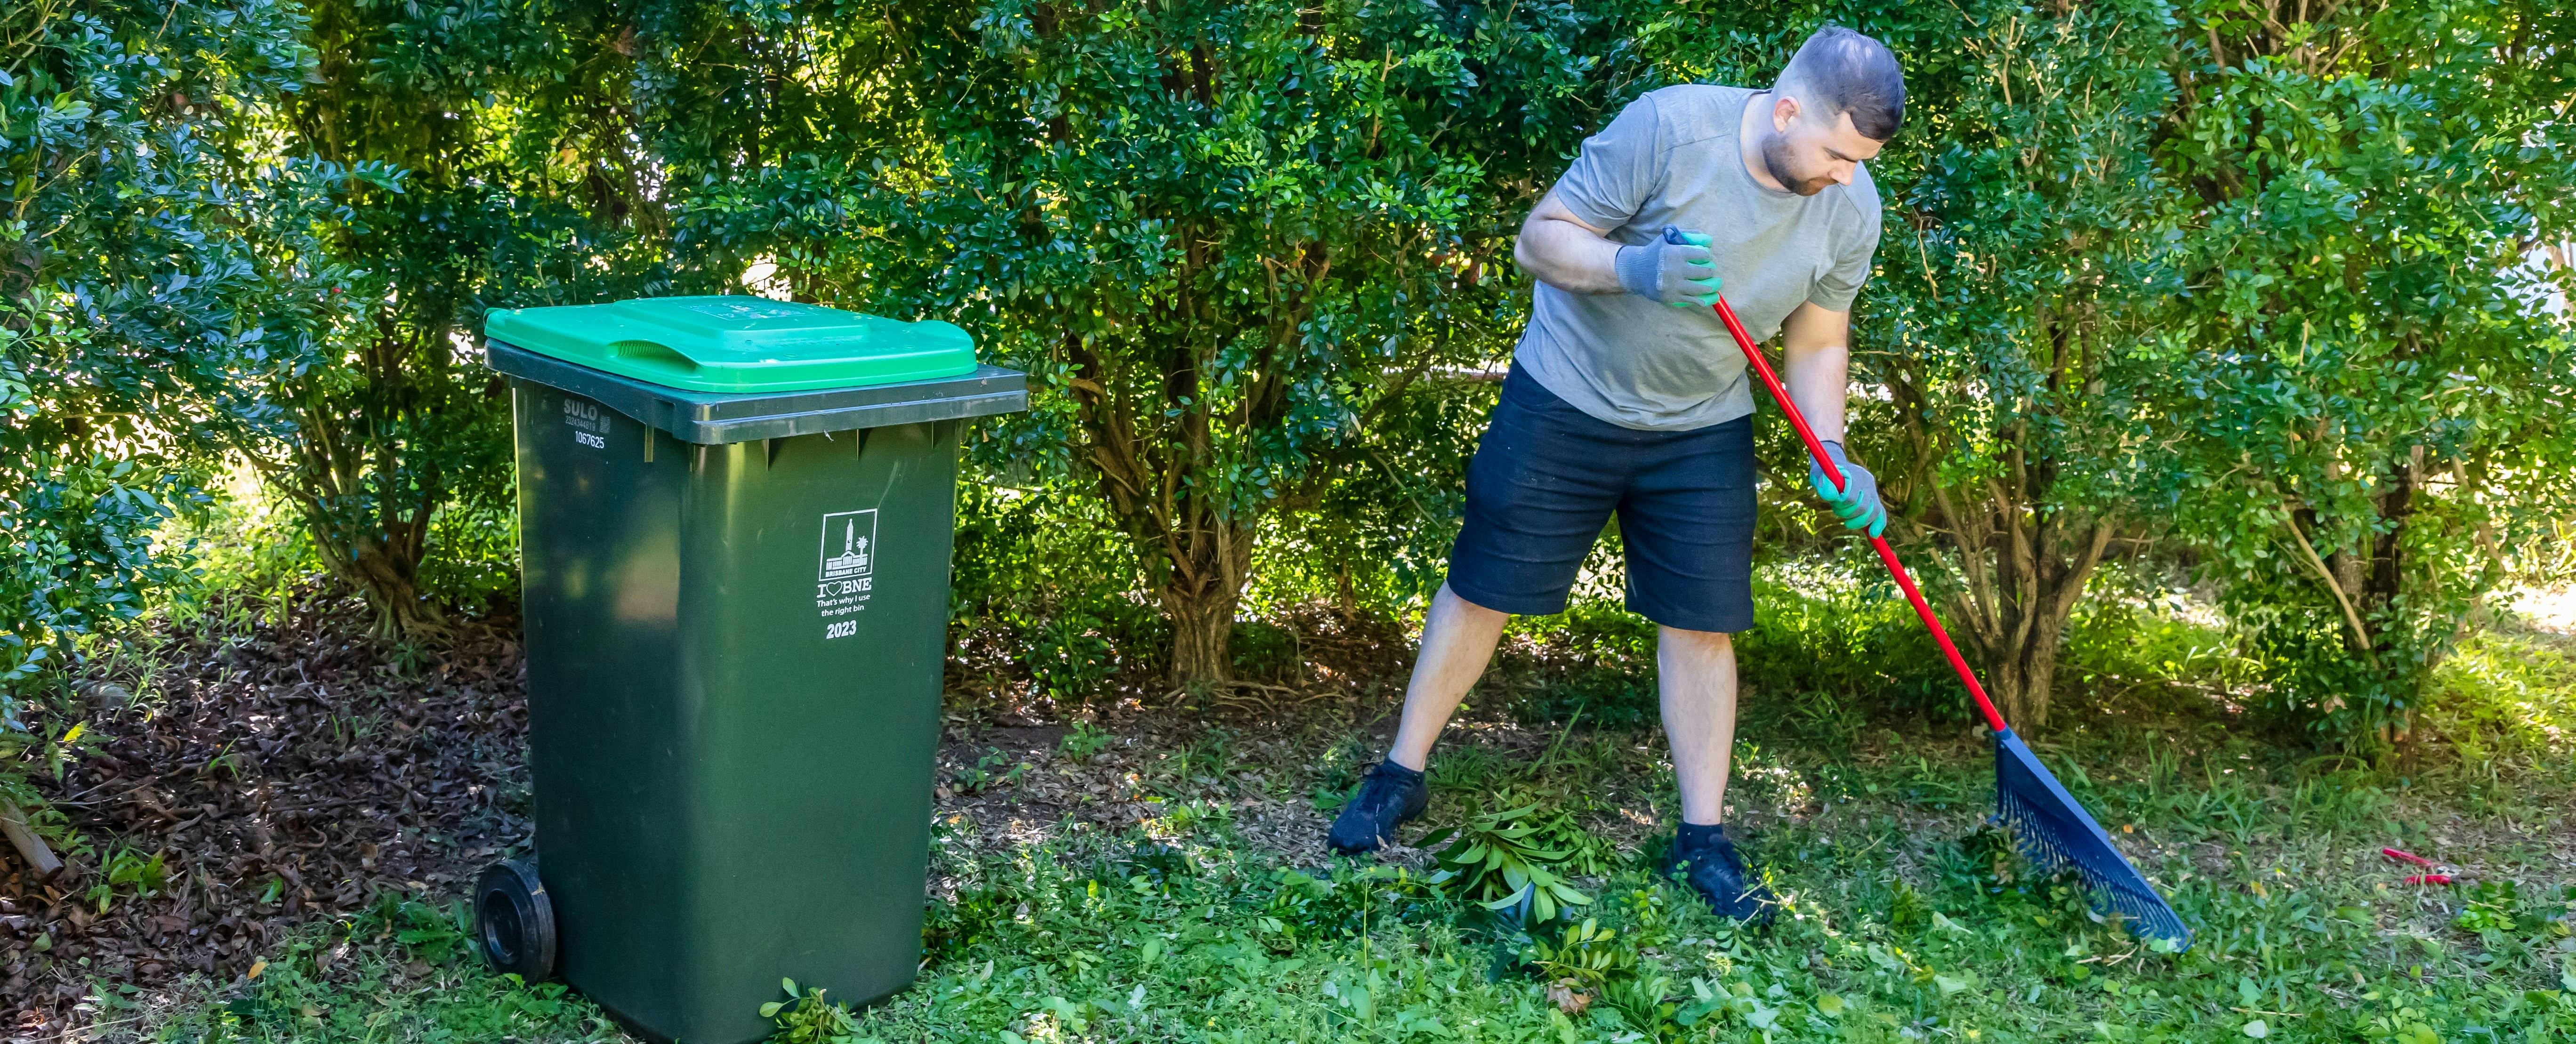 Person emptying food scraps from kitchen caddy into green waste recycling bin